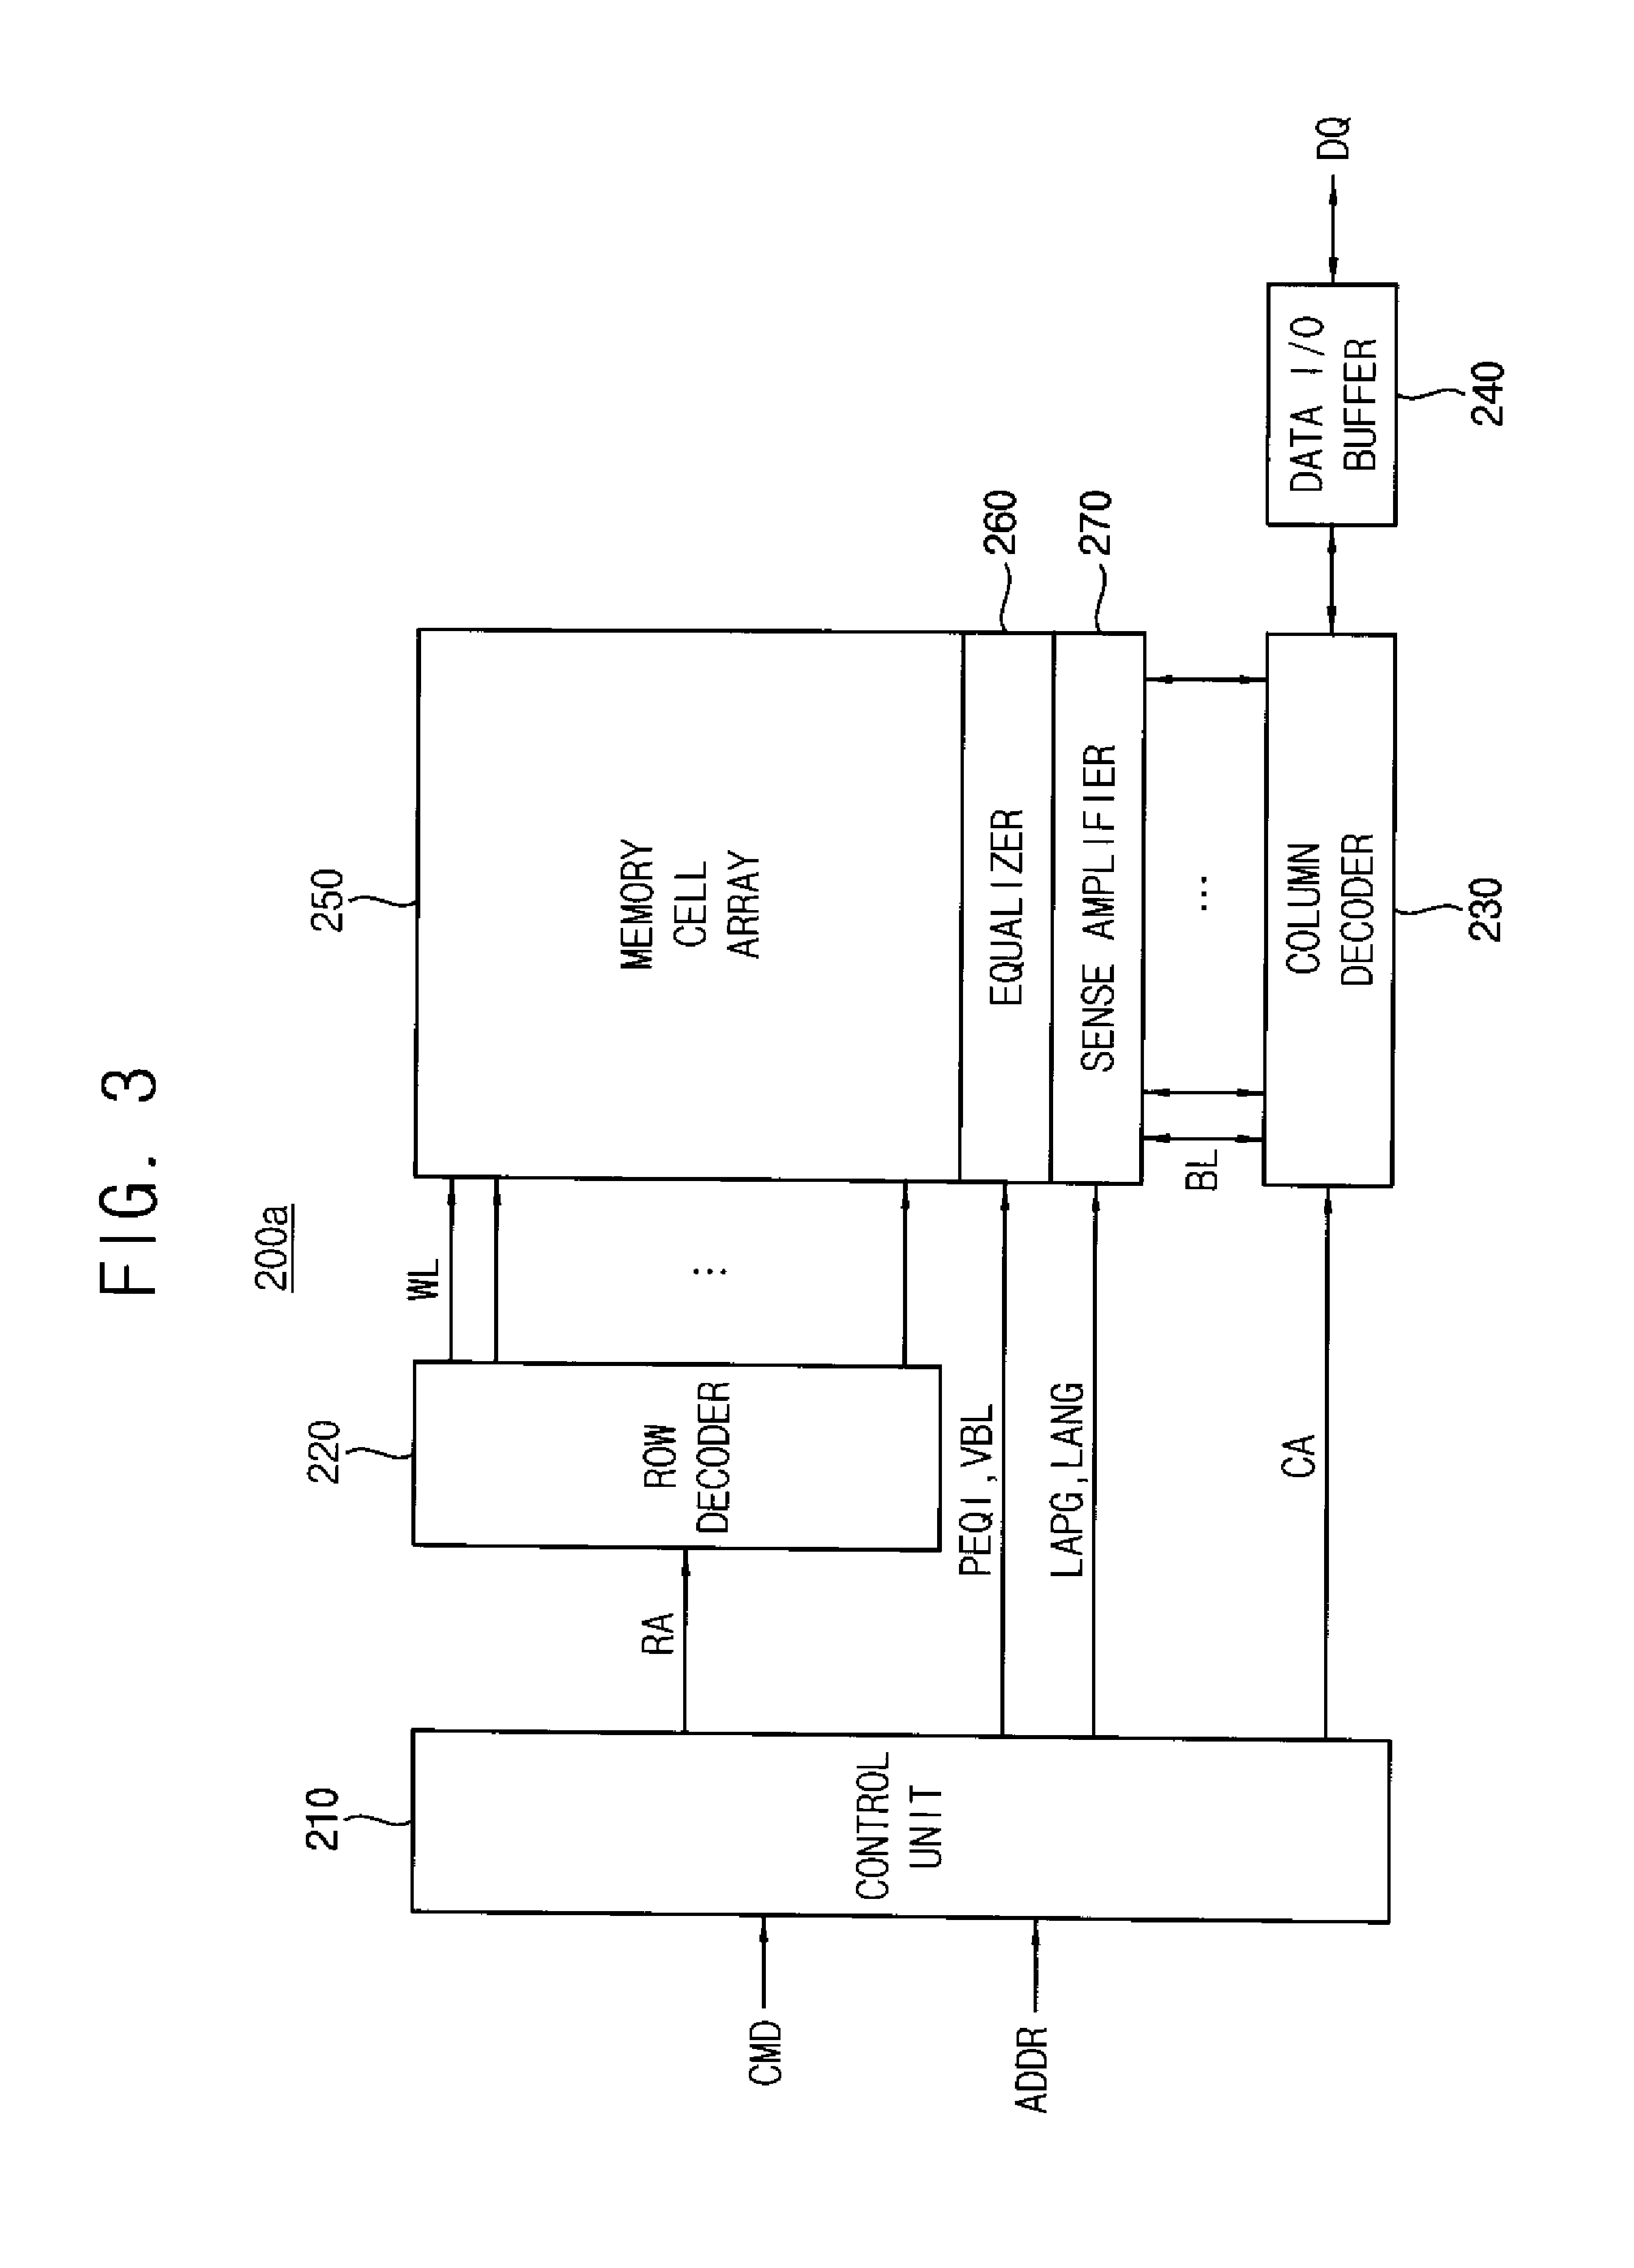 Methods of copying a page in a memory device and methods of managing pages in a memory system